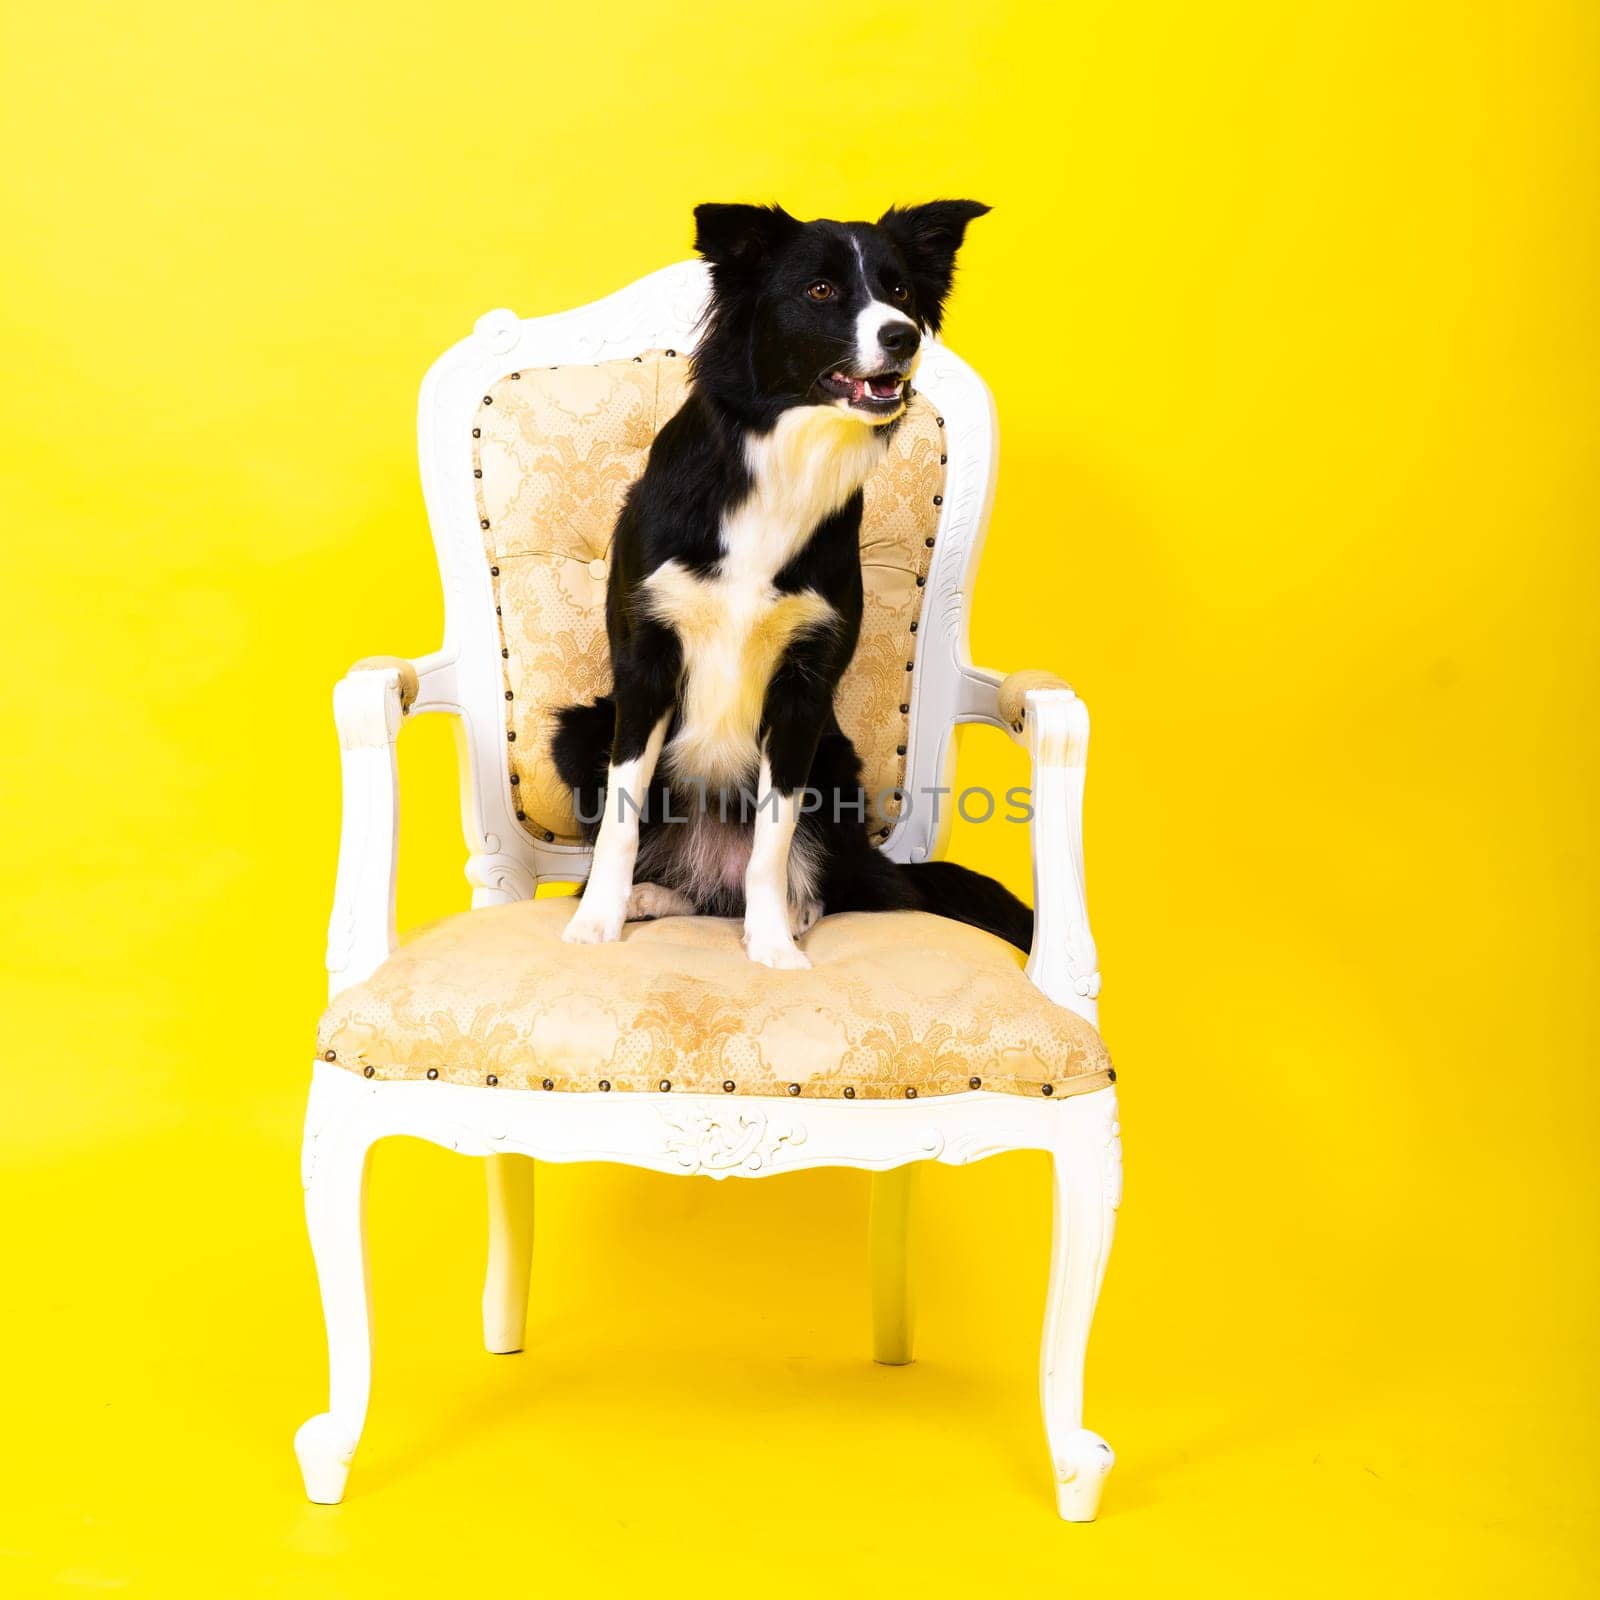 Border Collie portrait looking at camera against red and yellow background by Zelenin